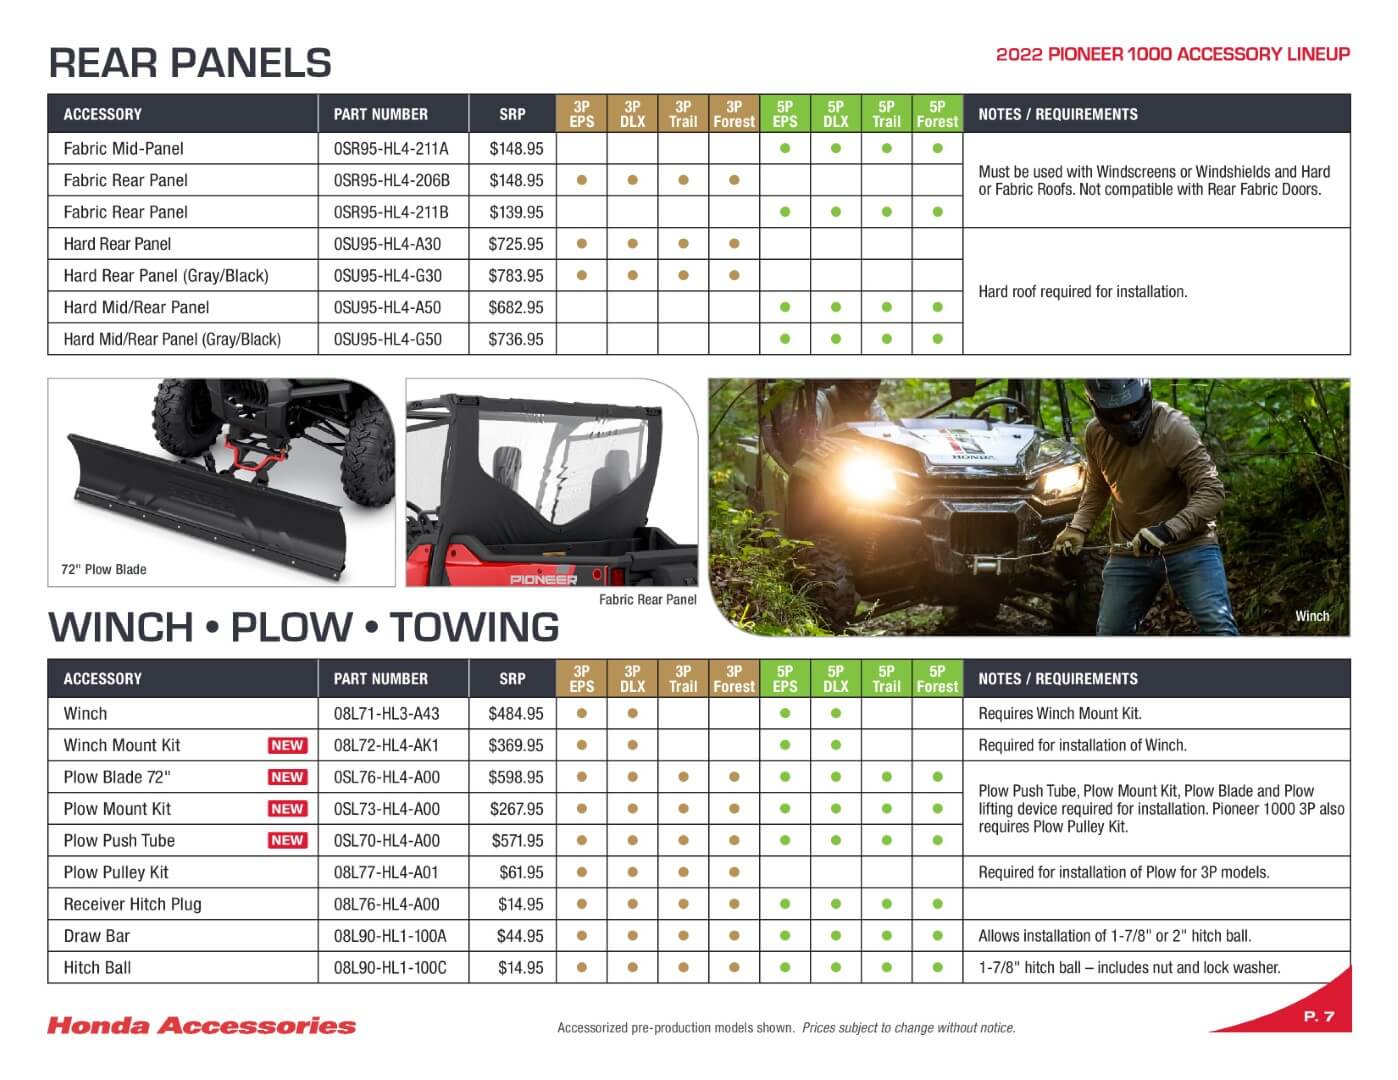 2022 Honda Pioneer 1000 Accessory Catalog / Accessories | Page 7 (including Pioneer 1000-5 Accessories)